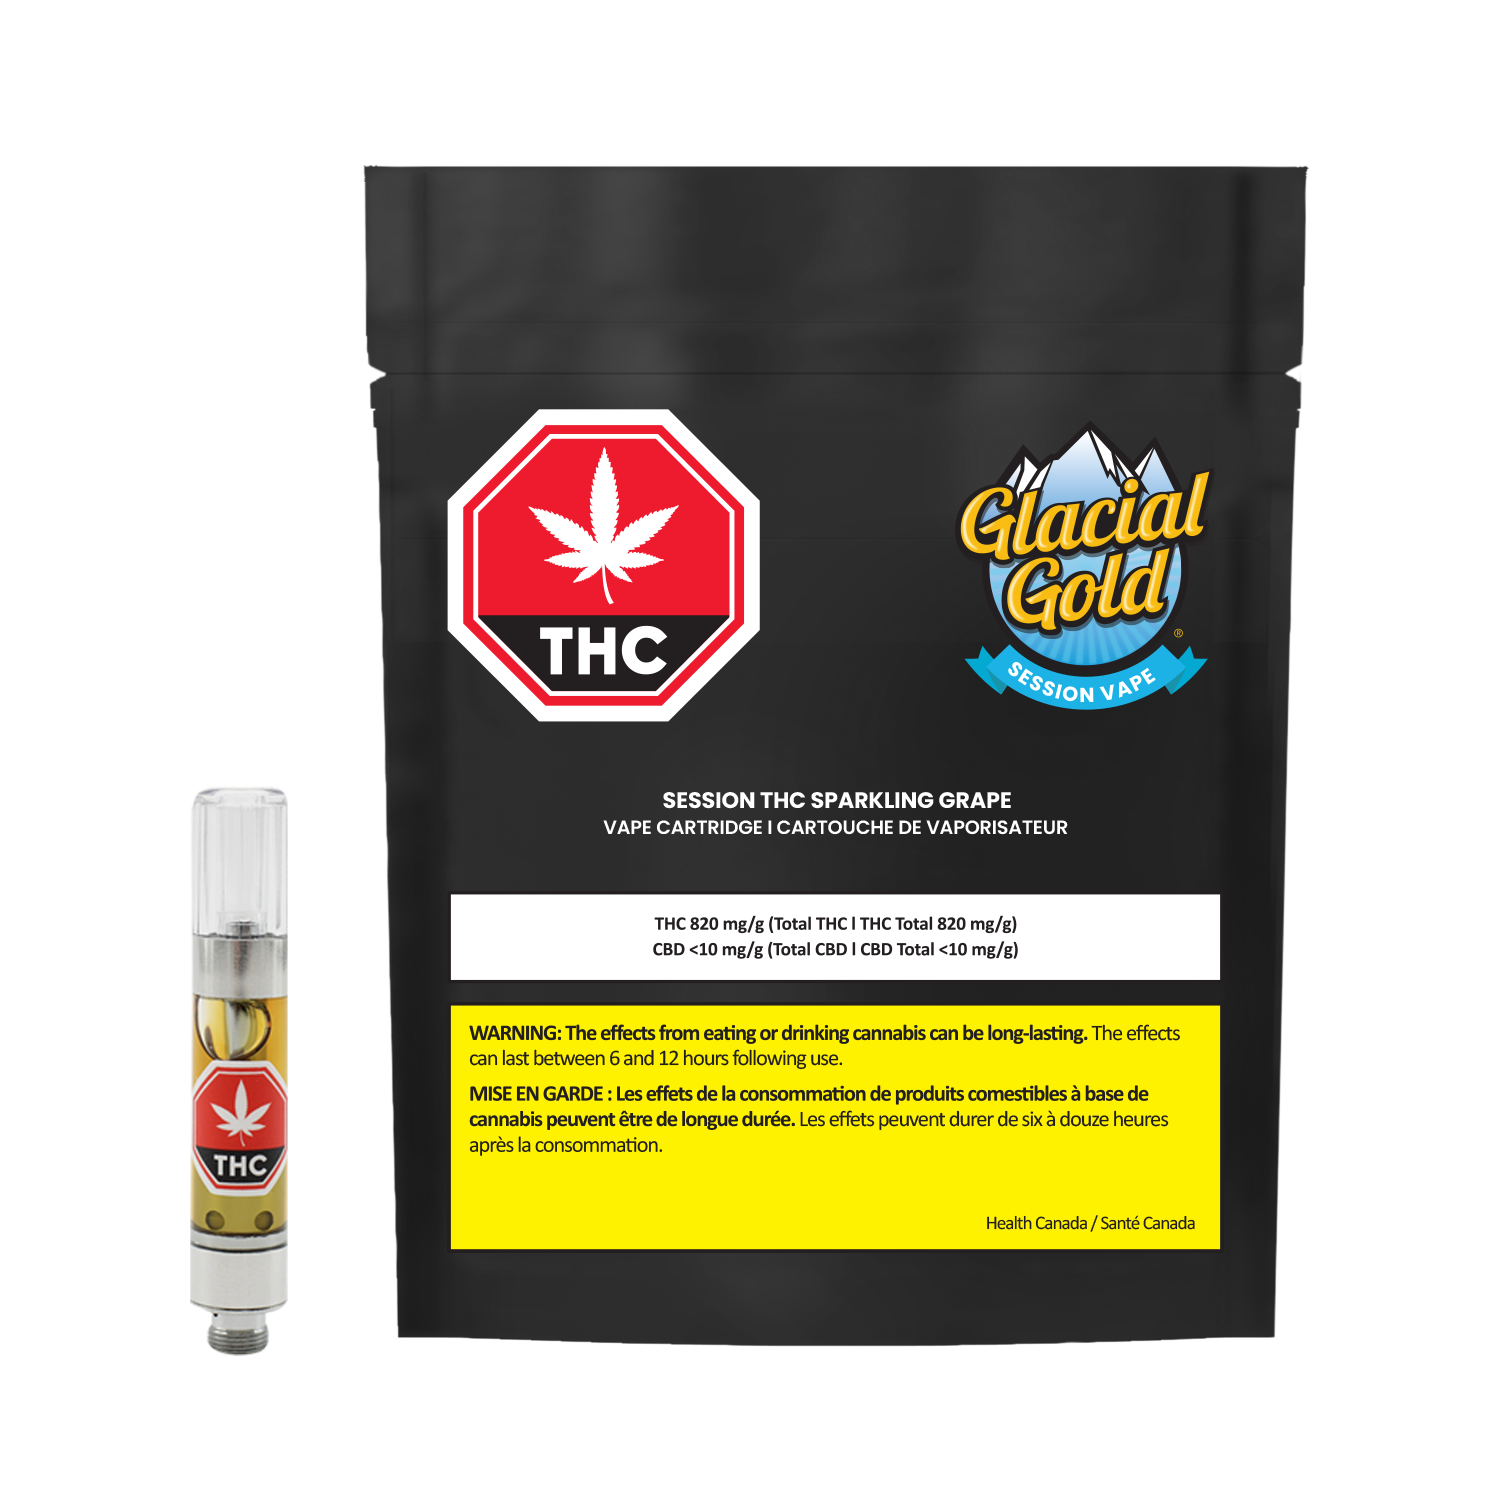 Cannabis Product Glacial Gold - Session THC Sparkling Grape 1g Vape by Glacial Gold - 1